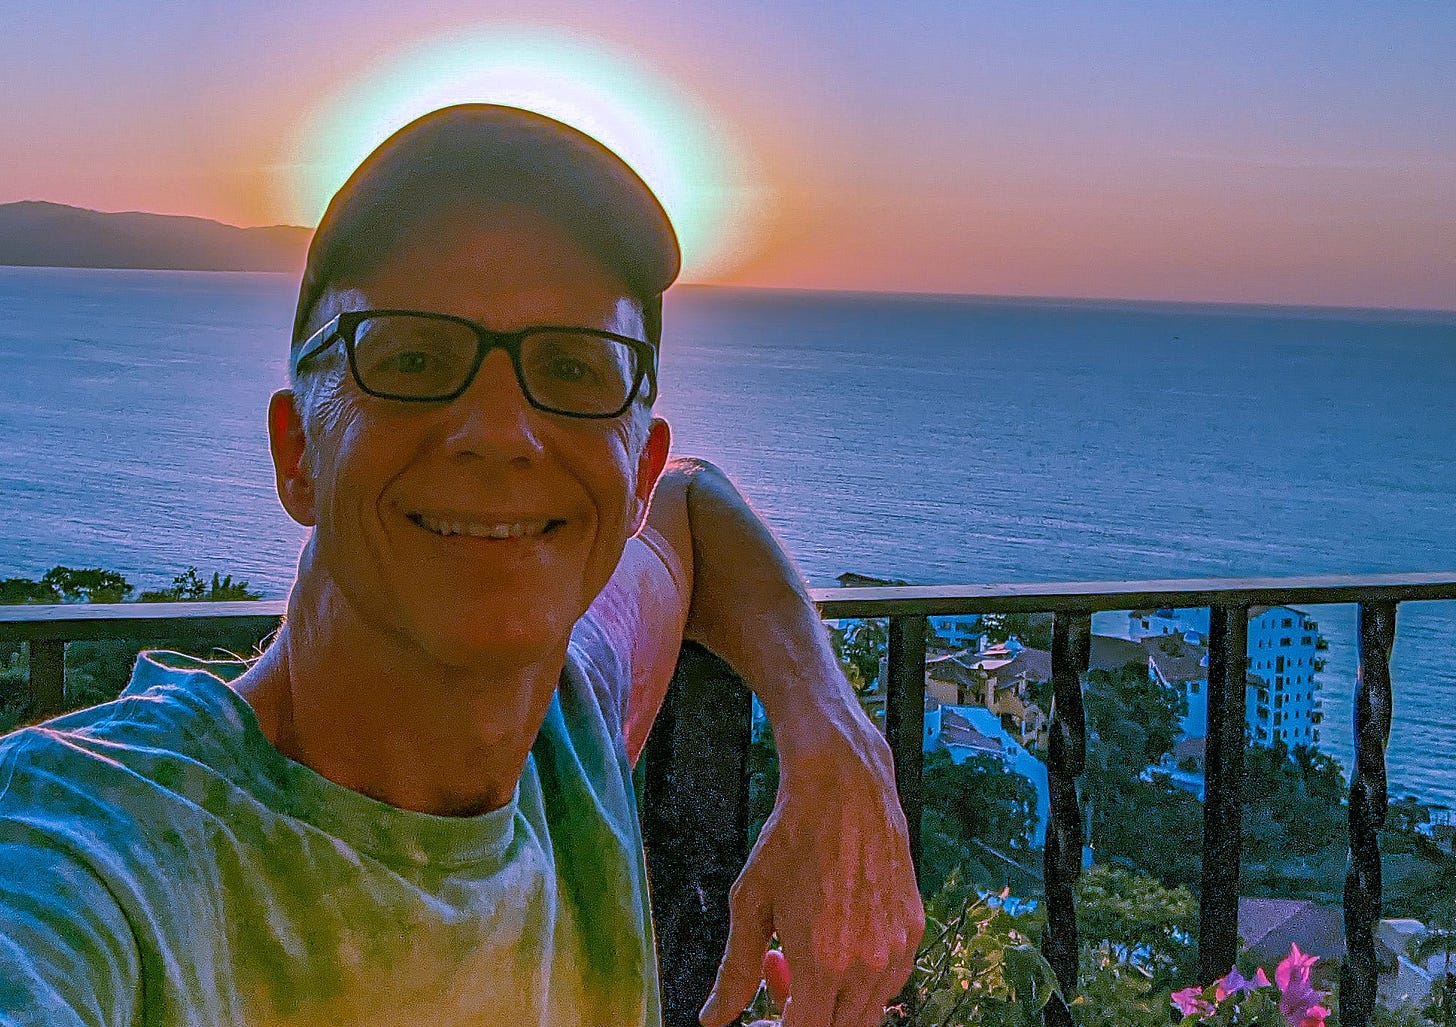 A smiling Michael standing on a patio in Puerto Vallarta, Mexico, with the ocean and sunset behind him.